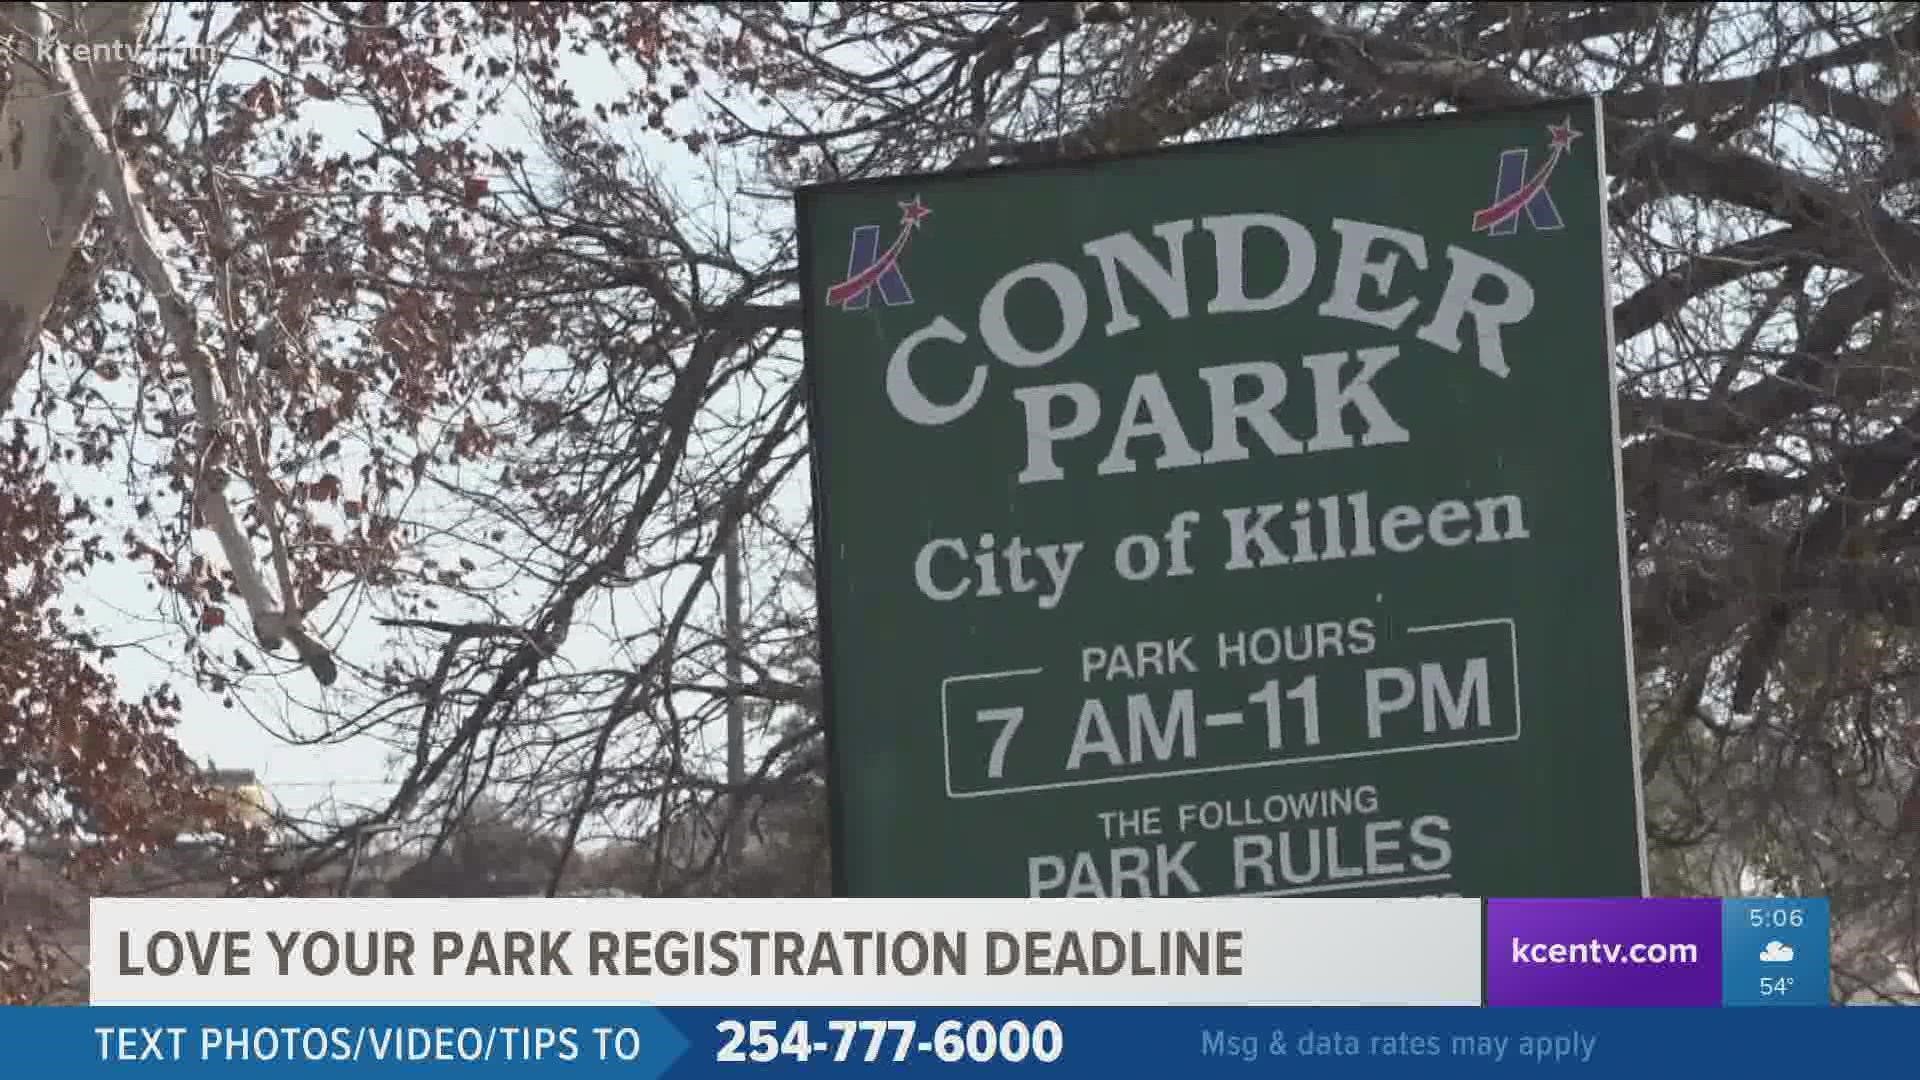 Killeen's Conder Park is in need of some lovin' for Love Your Park Day. The city is looking for volunteers for park restoration.